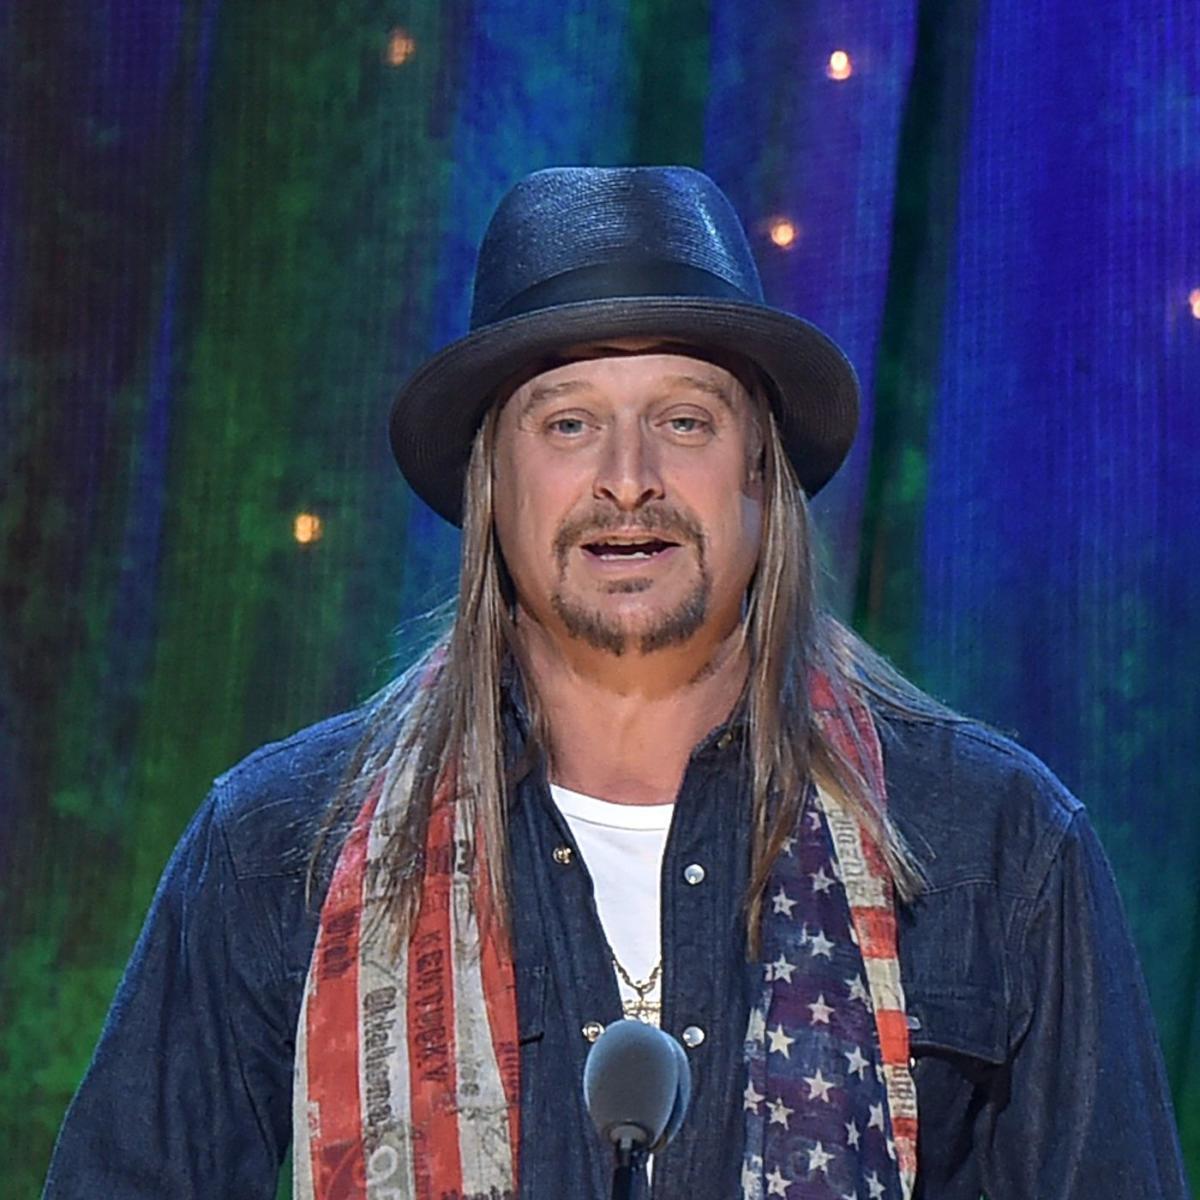 Discover the Iconic Kid Rock Singer, Songwriter, Rapper, and Actor